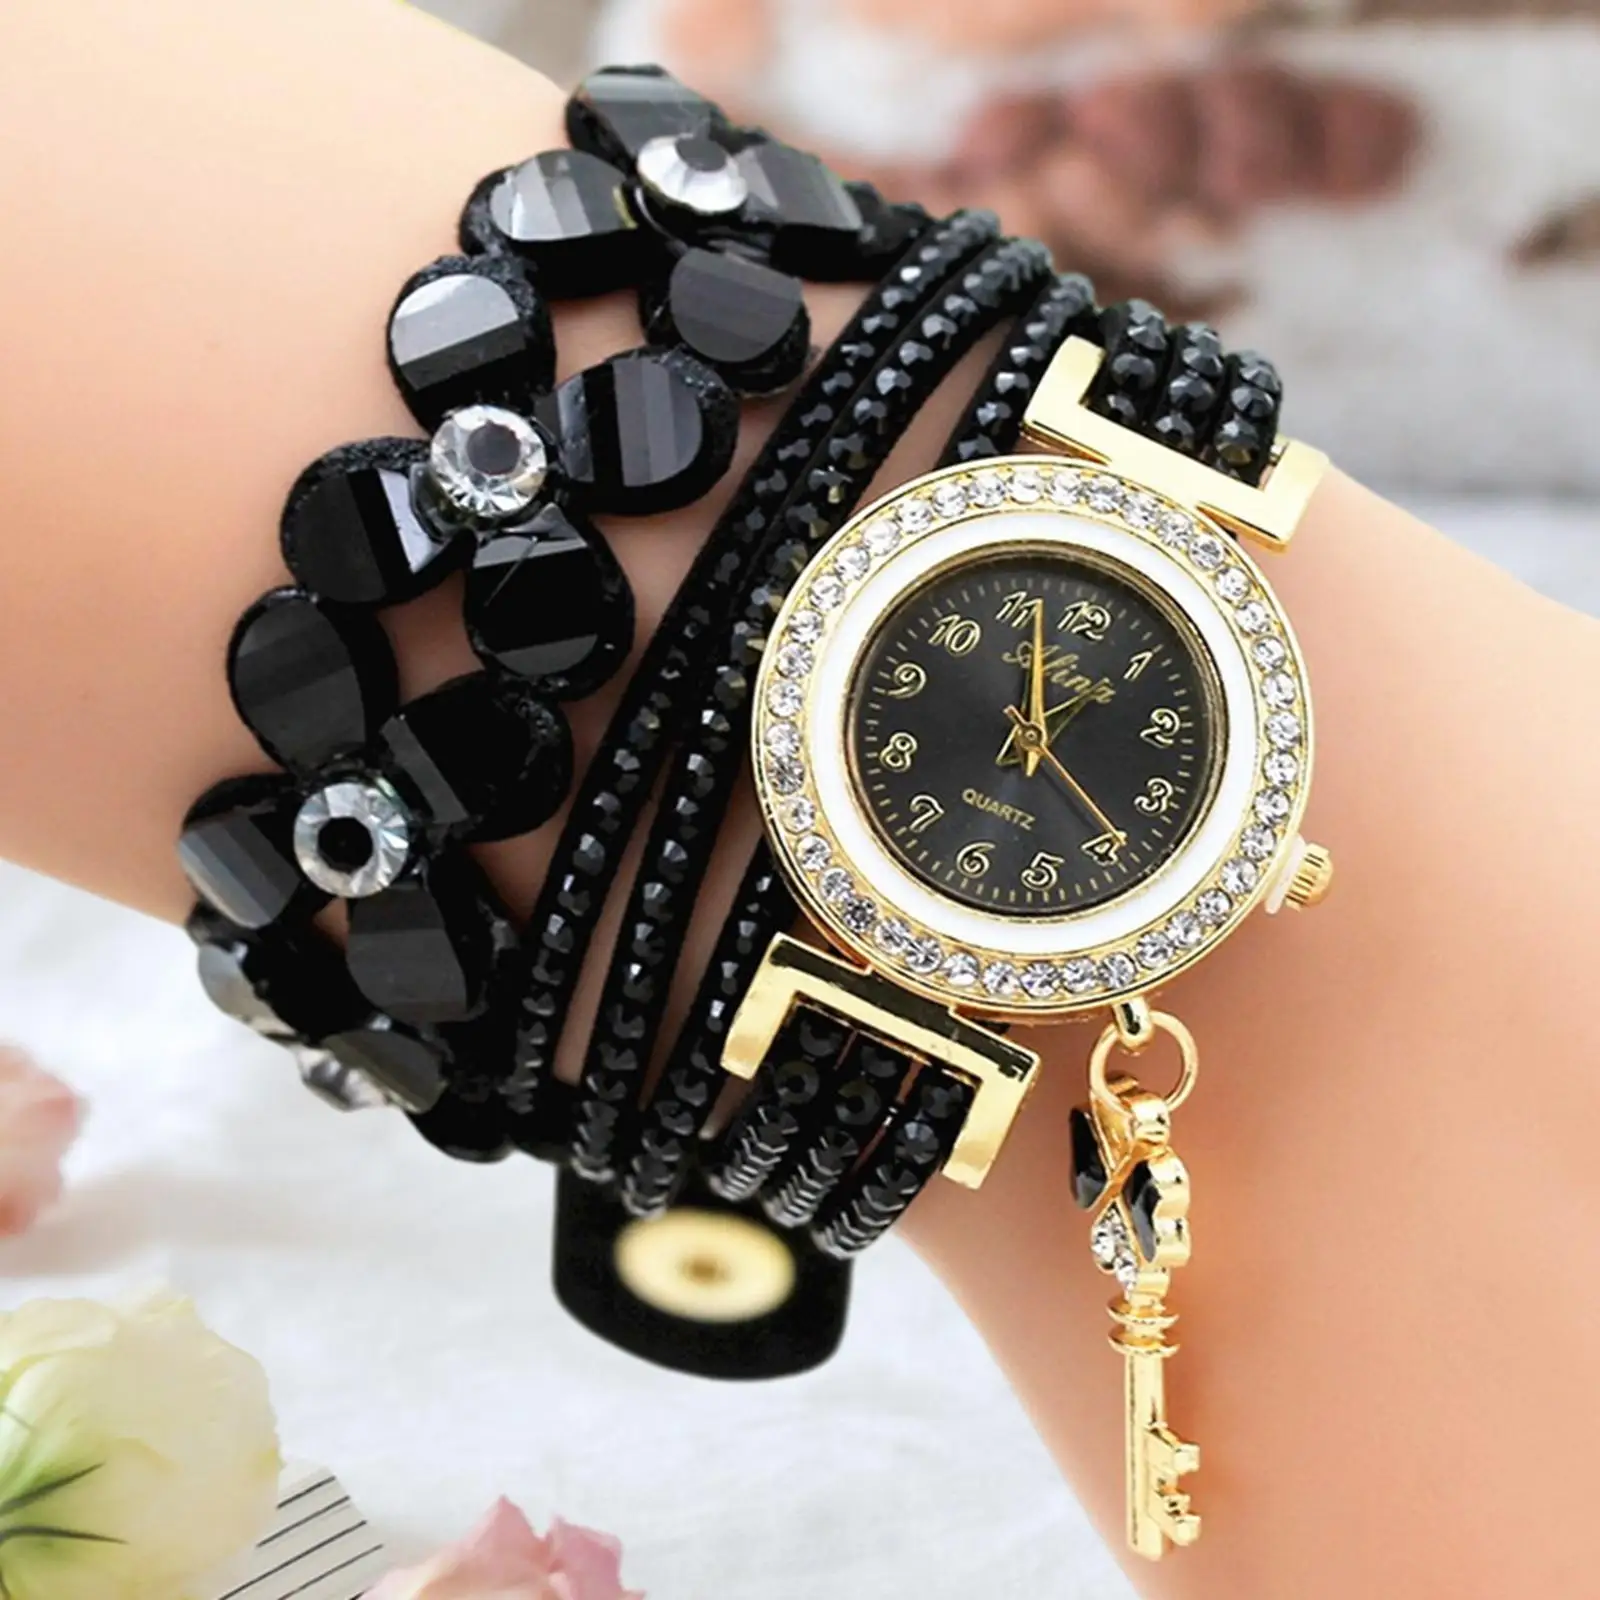 Bracelet Watch Durable Portable Time Display Decorative Wristwatch for Travel Birthday Gift Fishing Shopping Outdoor Activities